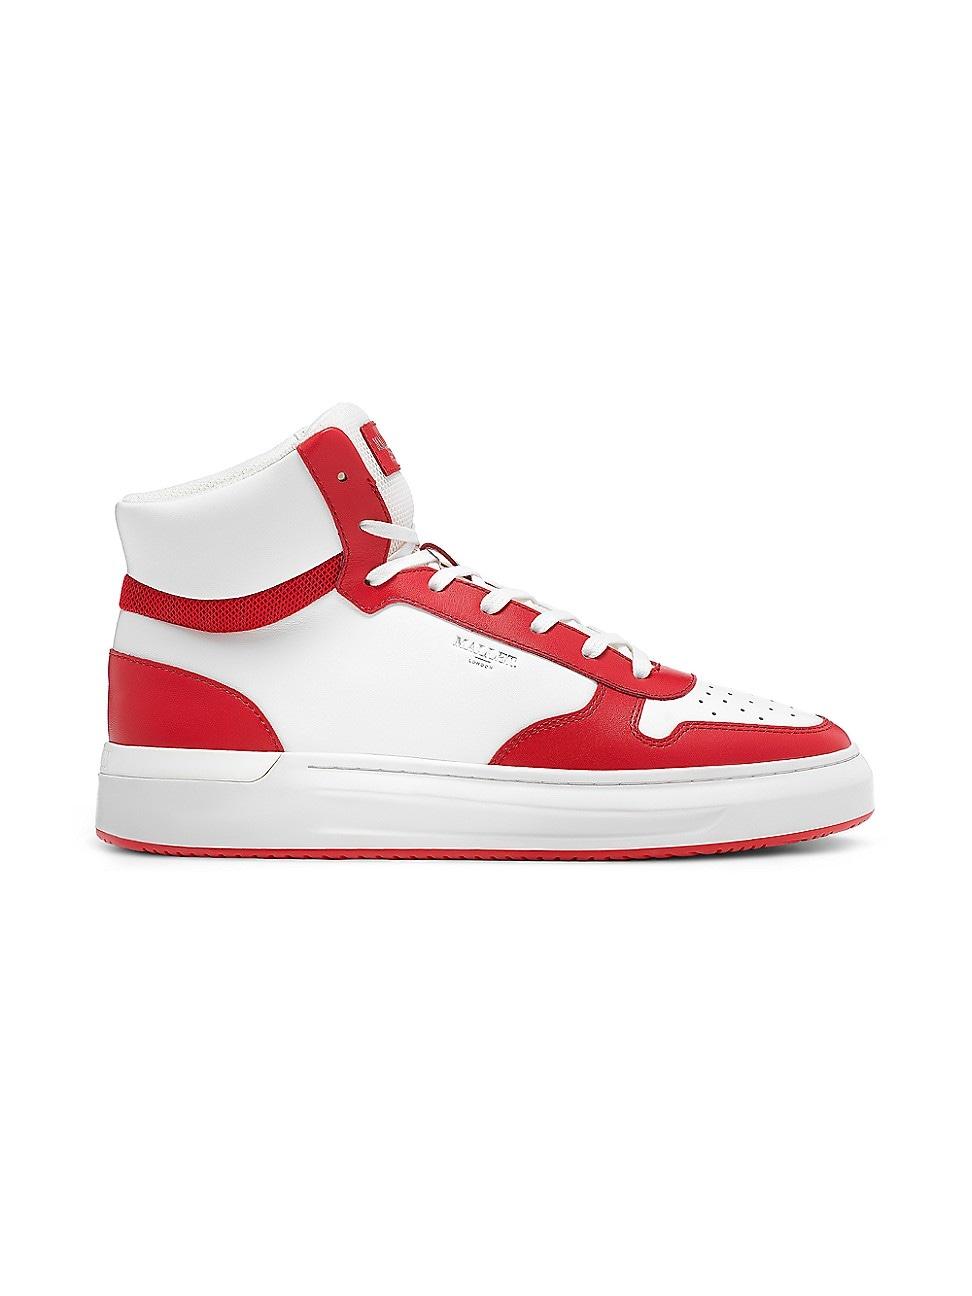 Mallet Hoxton Leather High-top Sneakers in Red for Men | Lyst